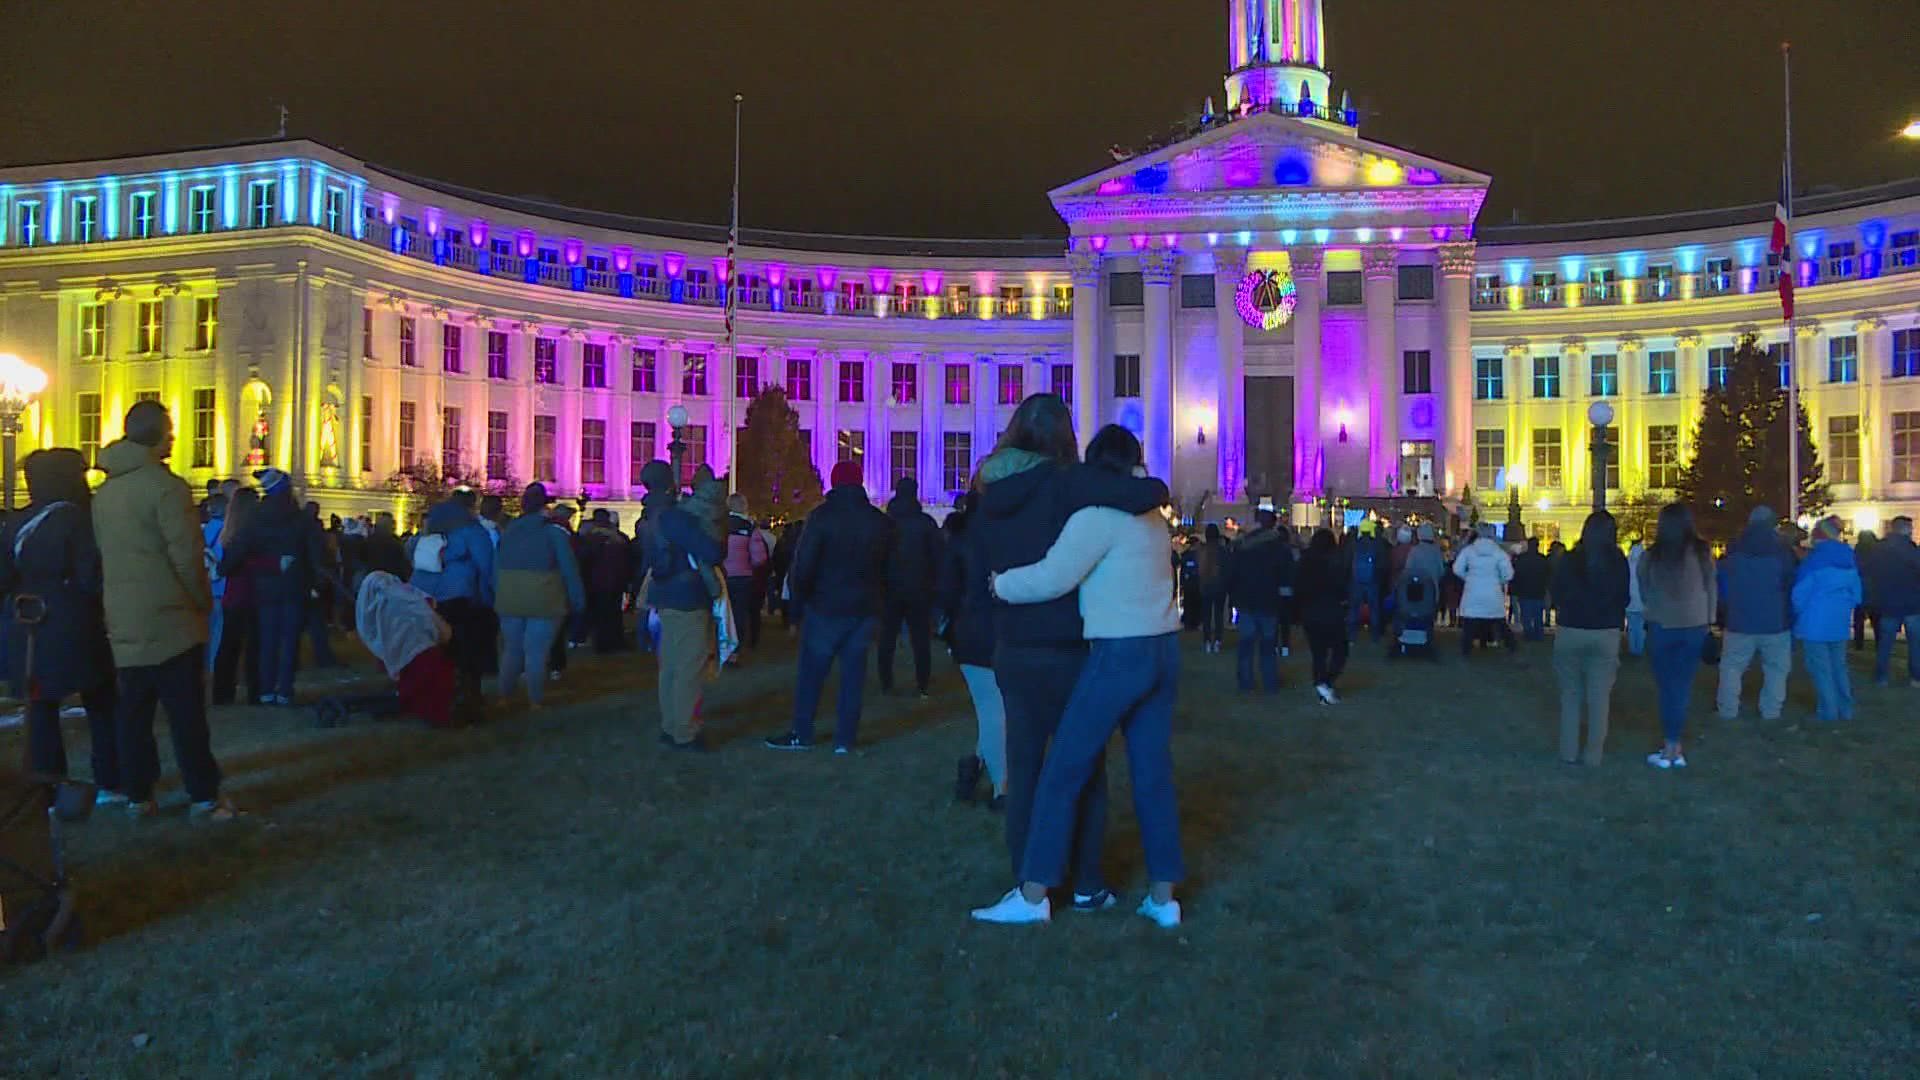 We talked to some folks at the Denver City and County building to find out what they're thankful for.